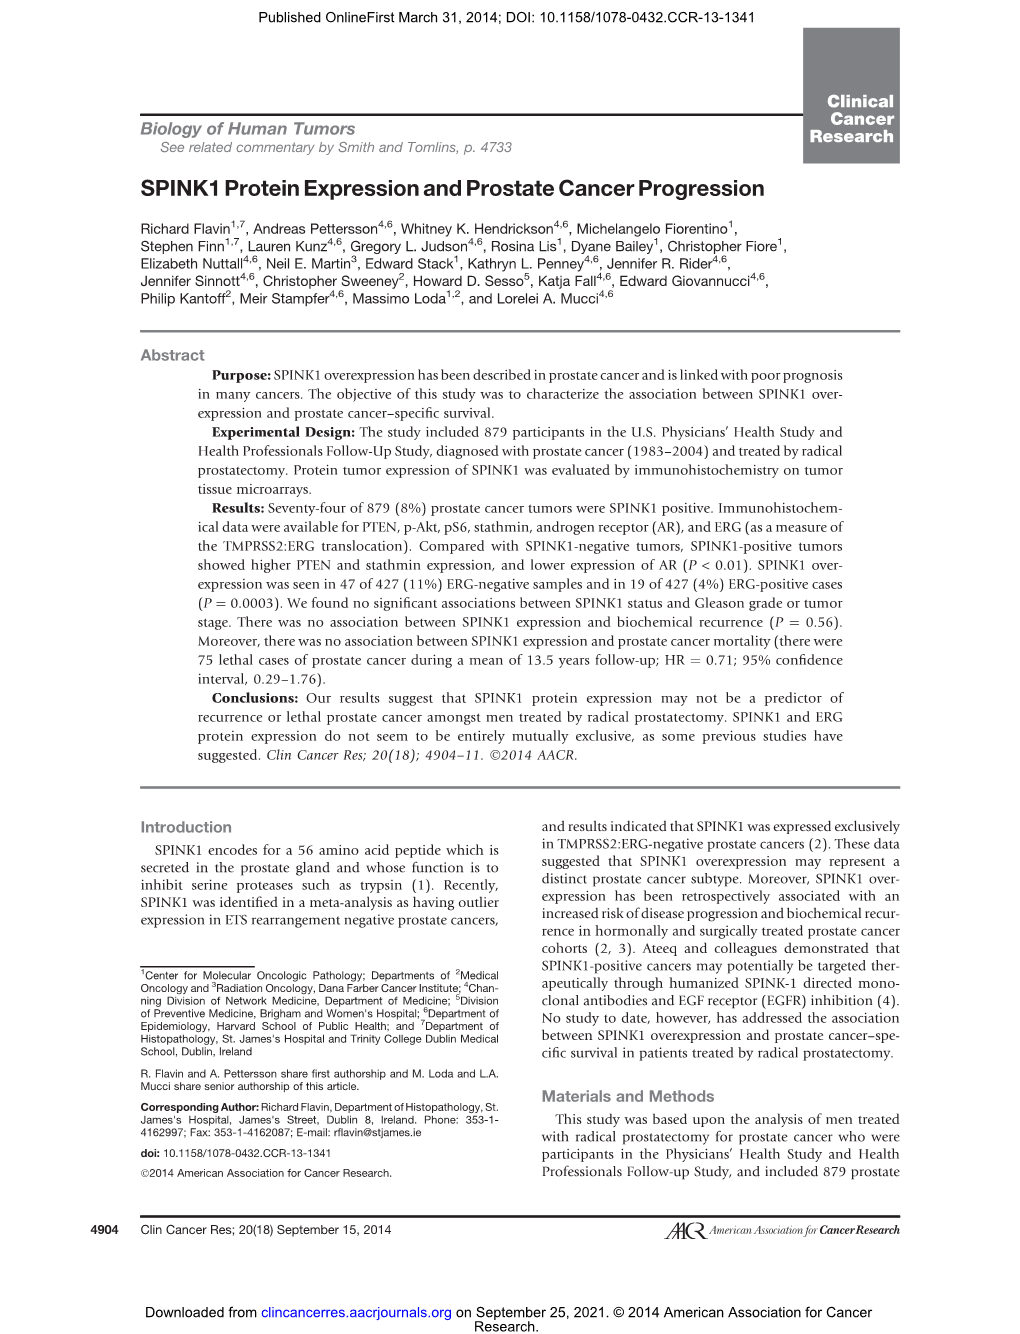 SPINK1 Protein Expression and Prostate Cancer Progression